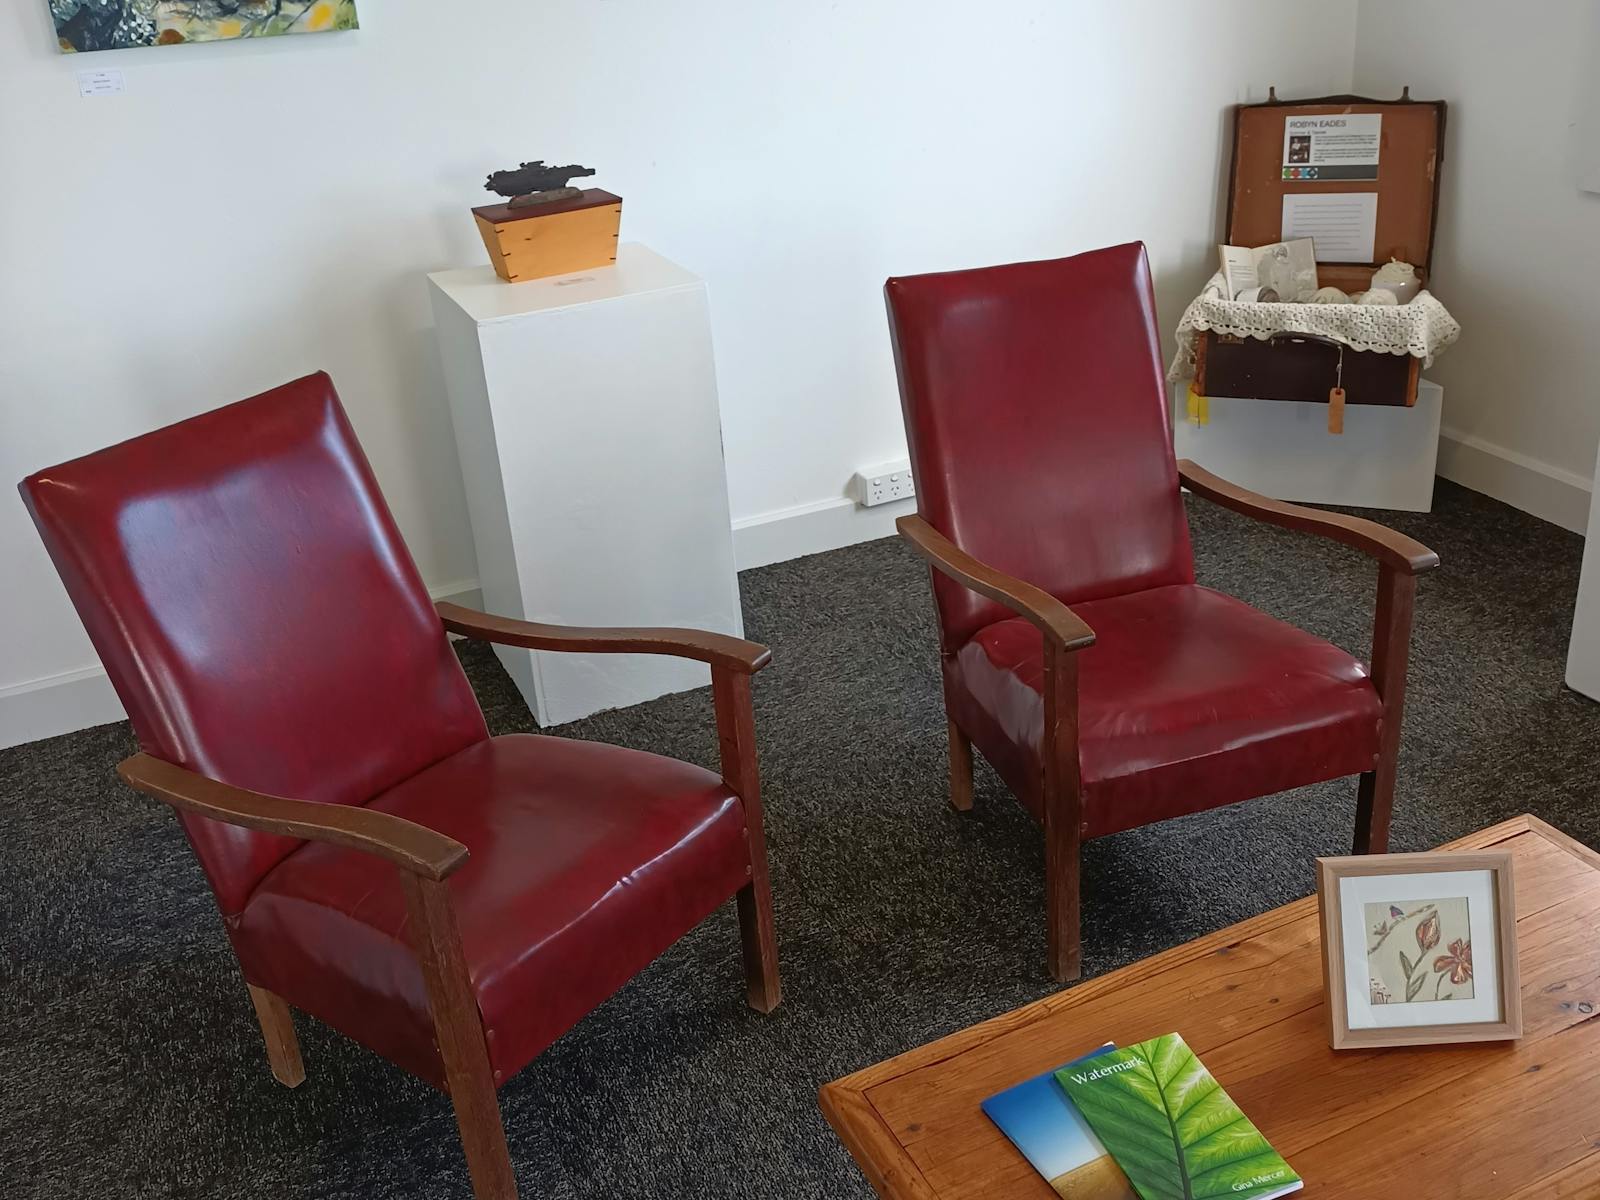 Cultural Centre room and chairs